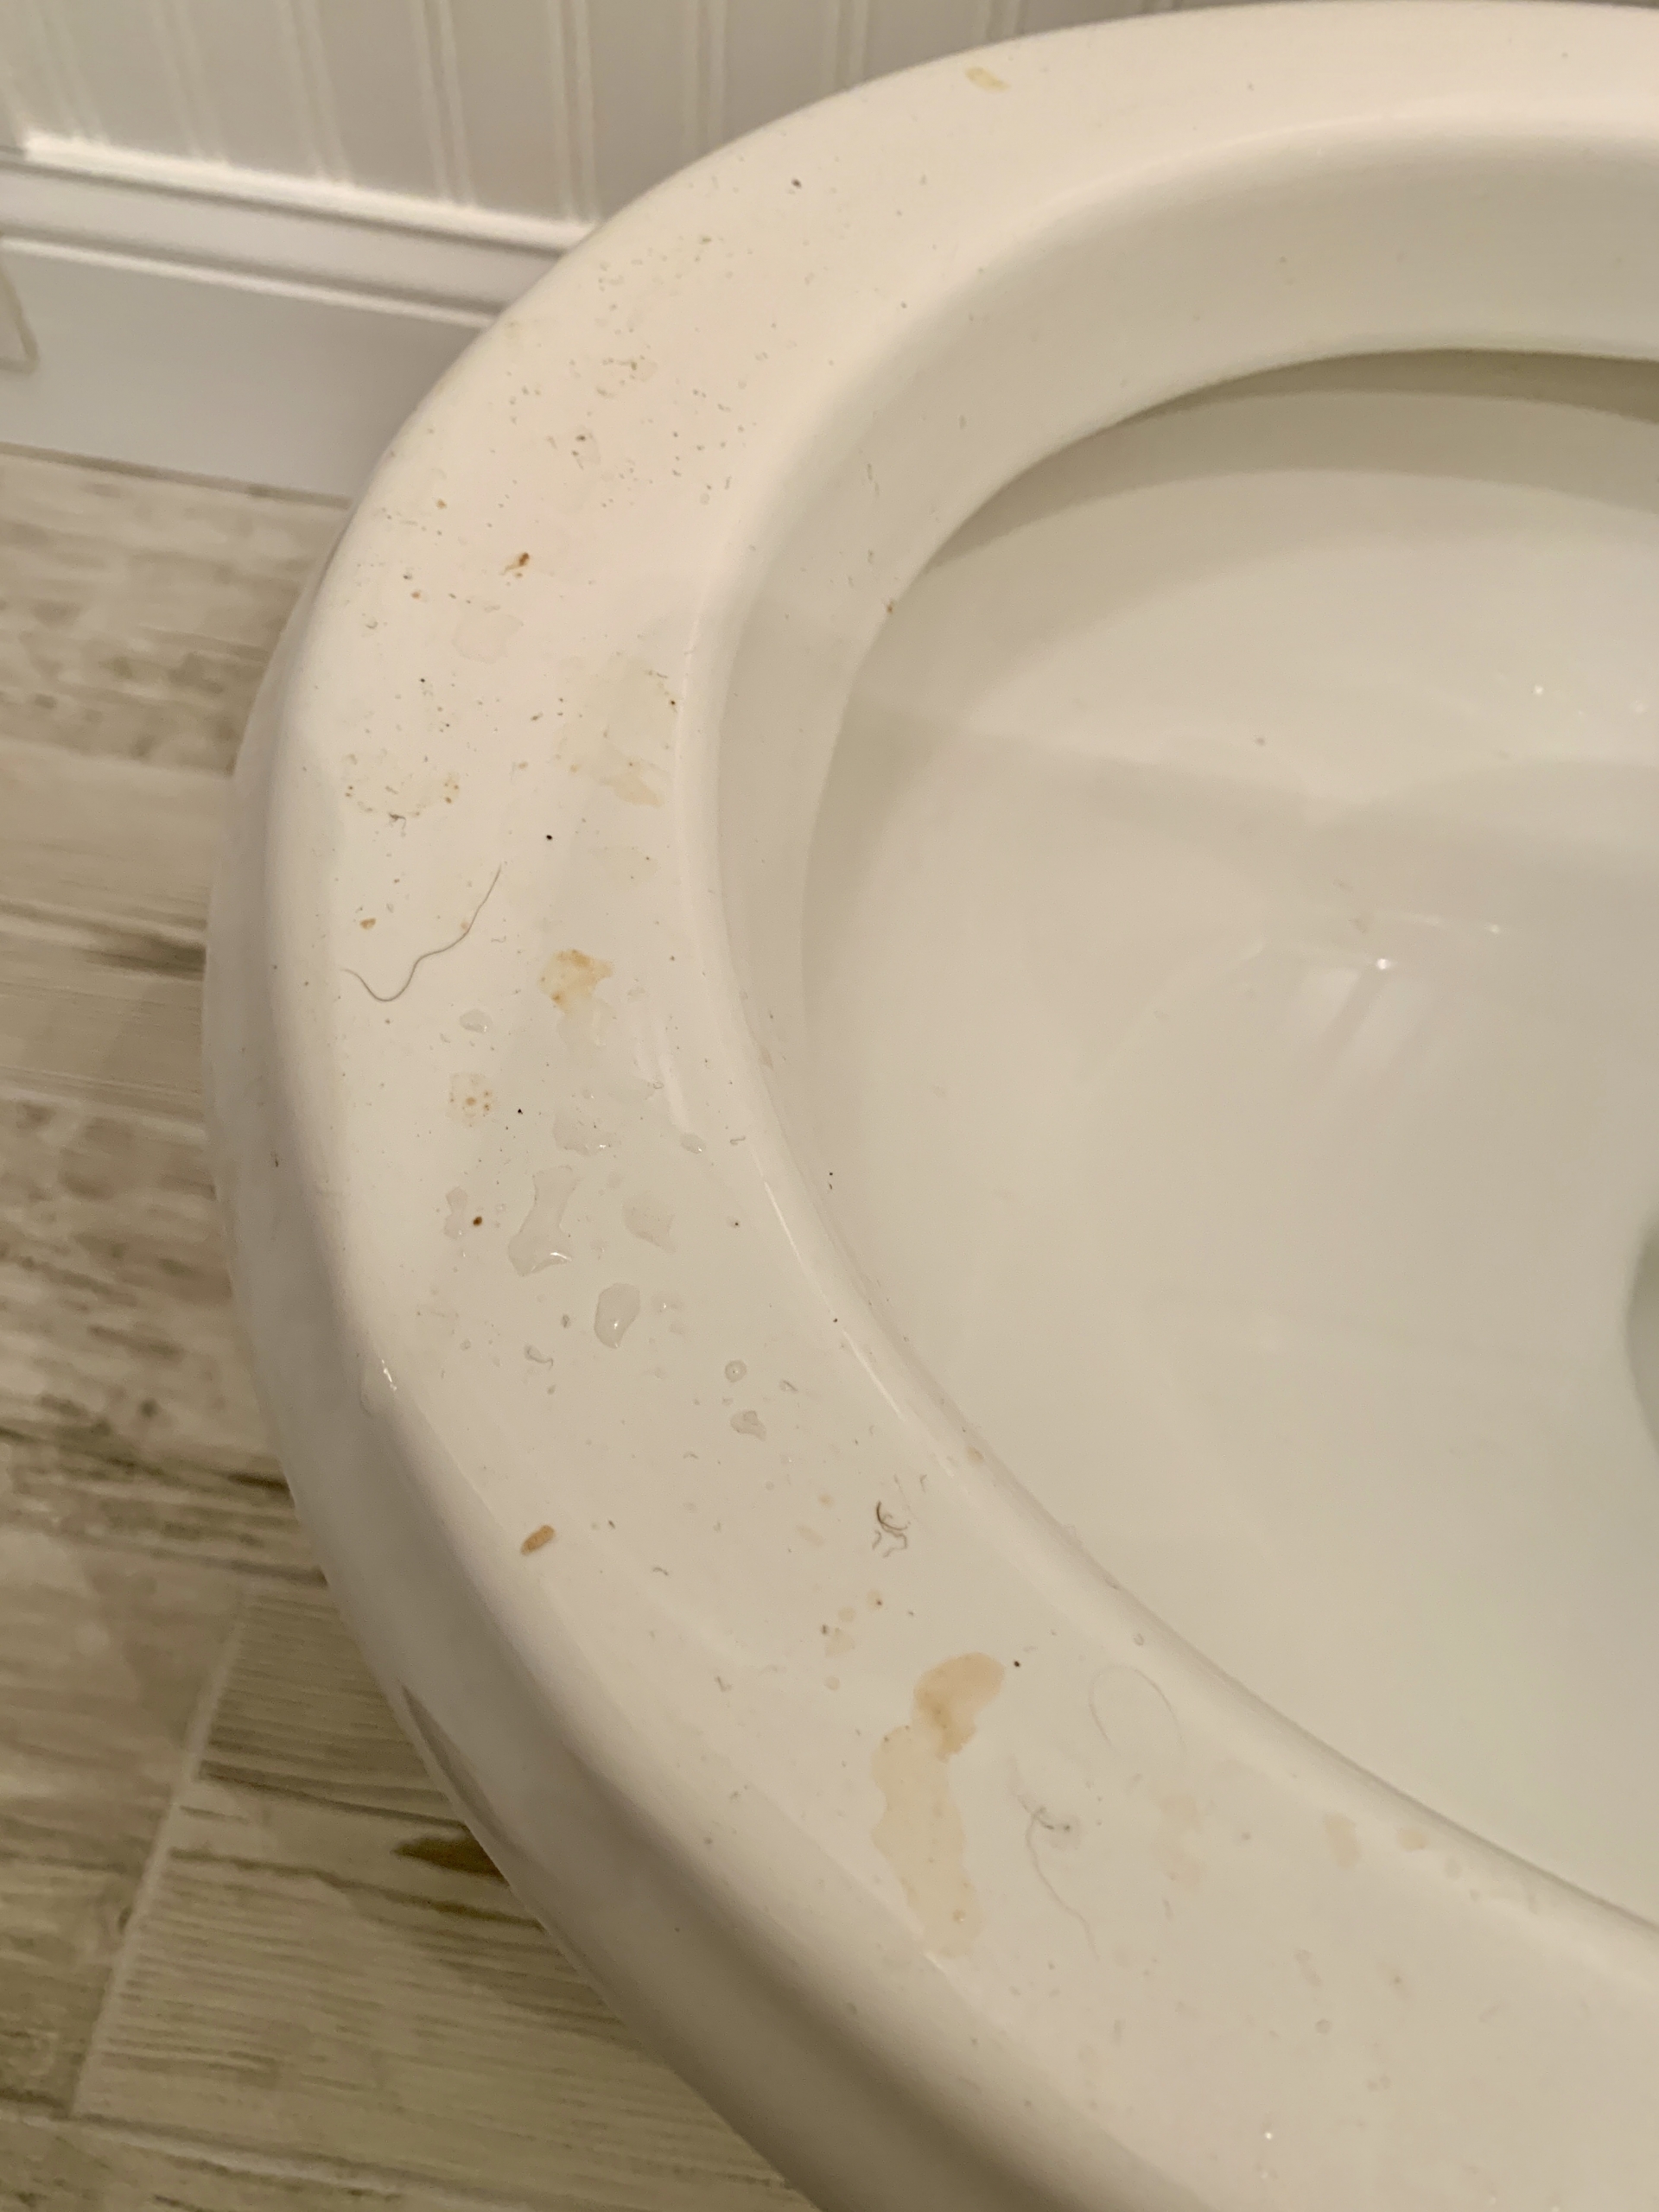 dirty toilet using airbnb